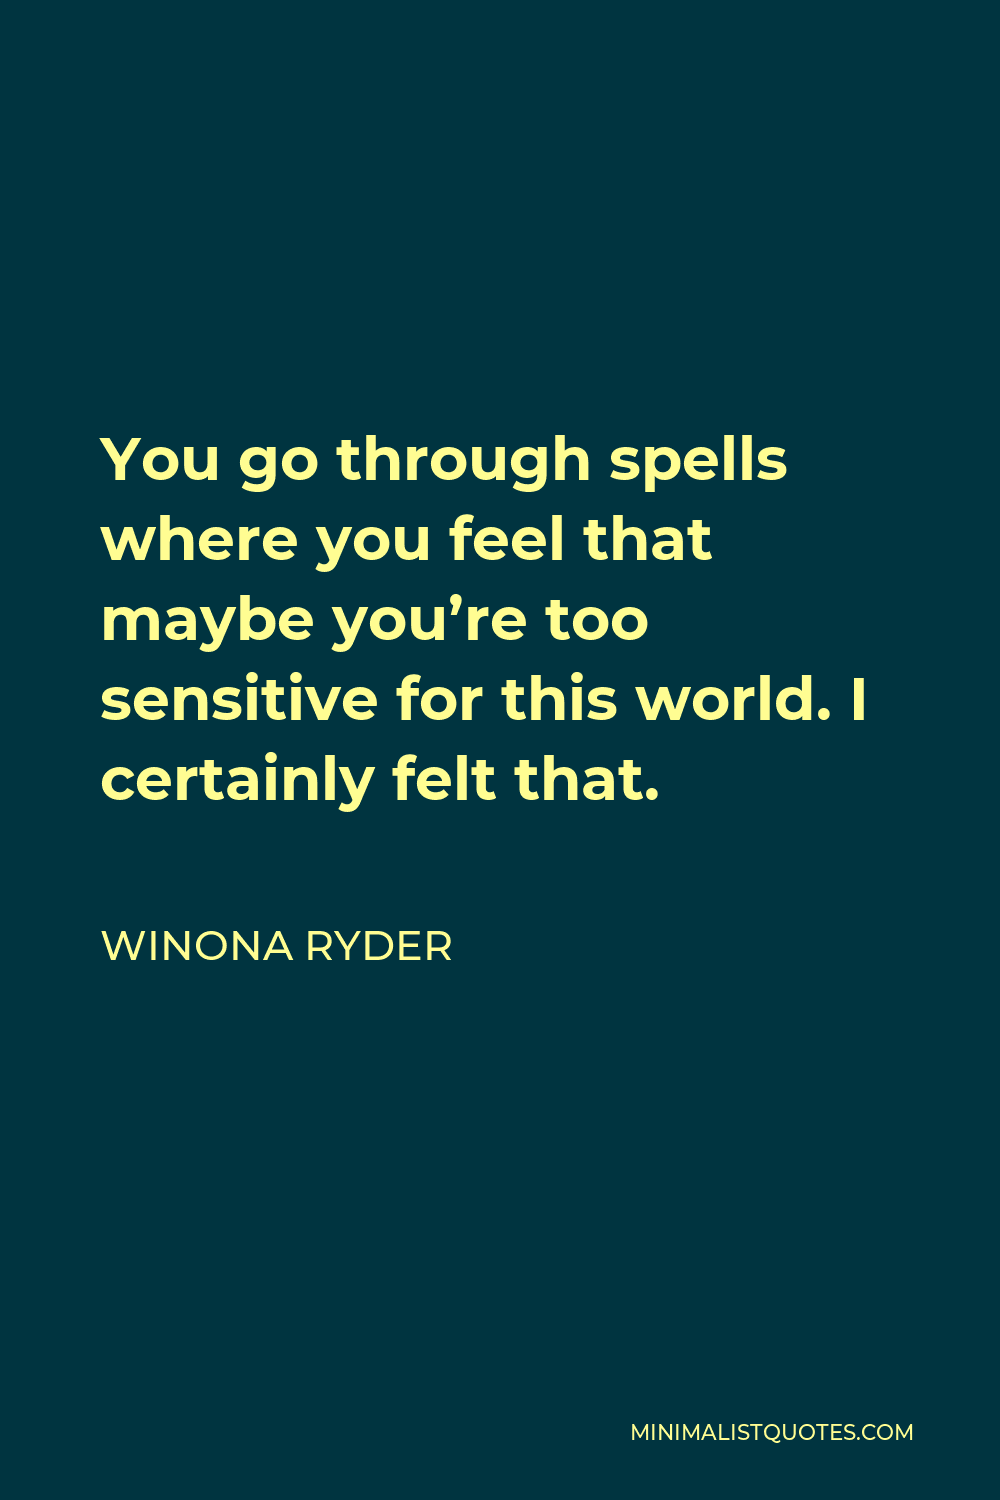 Winona Ryder Quote - You go through spells where you feel that maybe you’re too sensitive for this world. I certainly felt that.